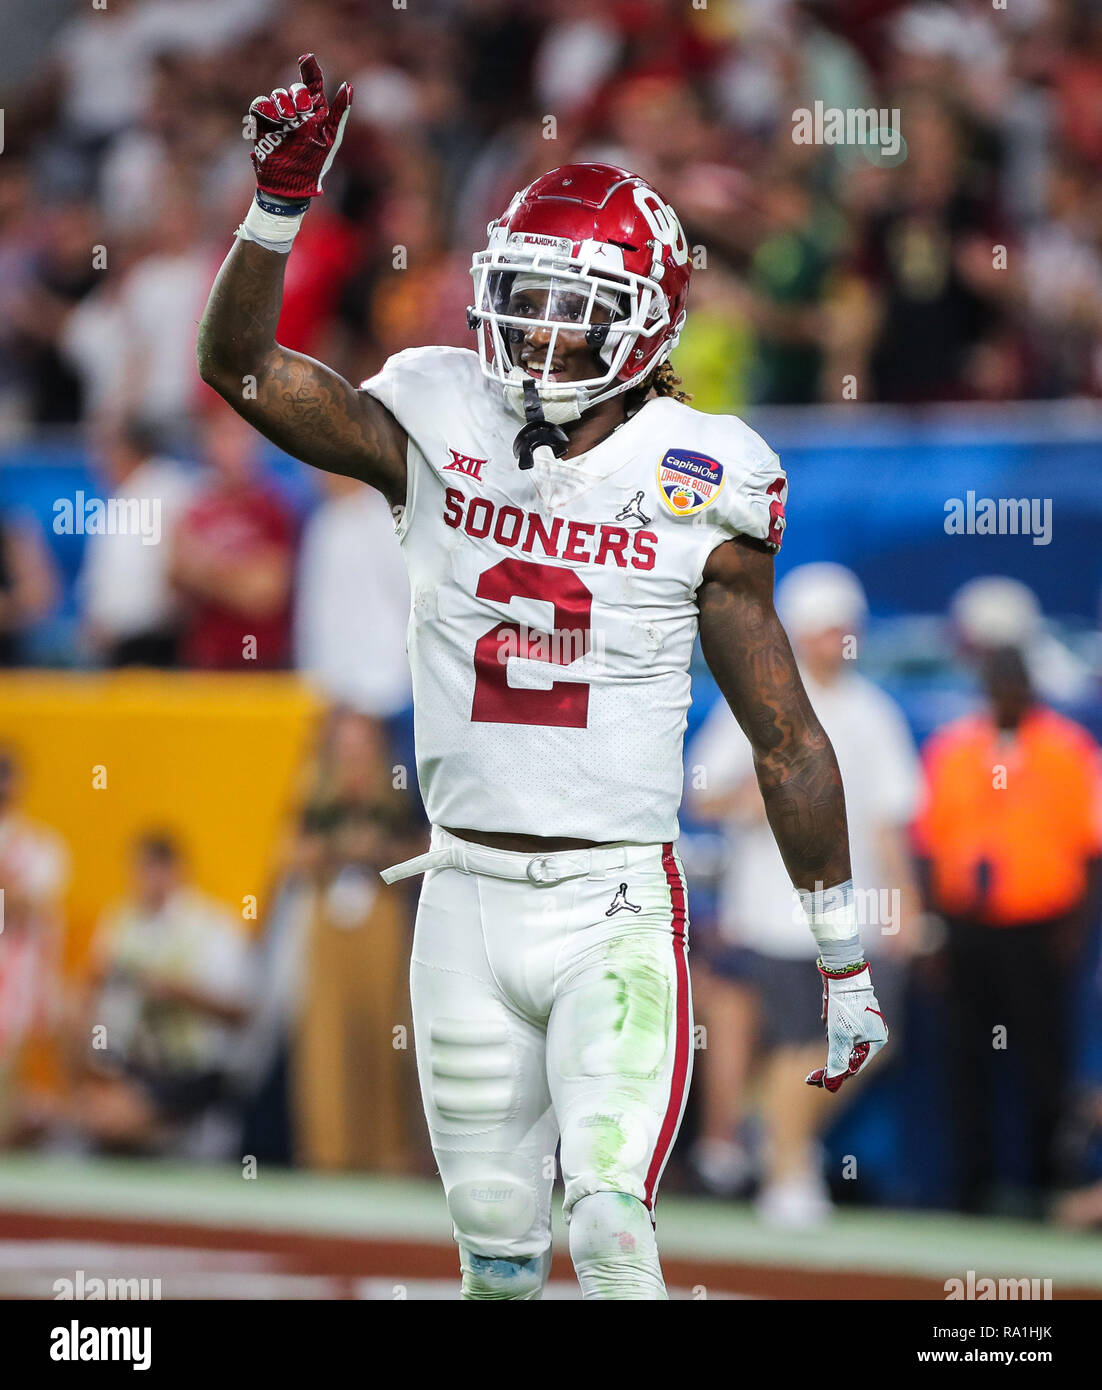 Miami Gardens, Florida, USA. 29th Dec, 2018. Oklahoma Sooners wide receiver  CeeDee Lamb (2) celebrates a team's touchdown against the Alabama Crimson  Tide during the college football playoff semifinal game at the